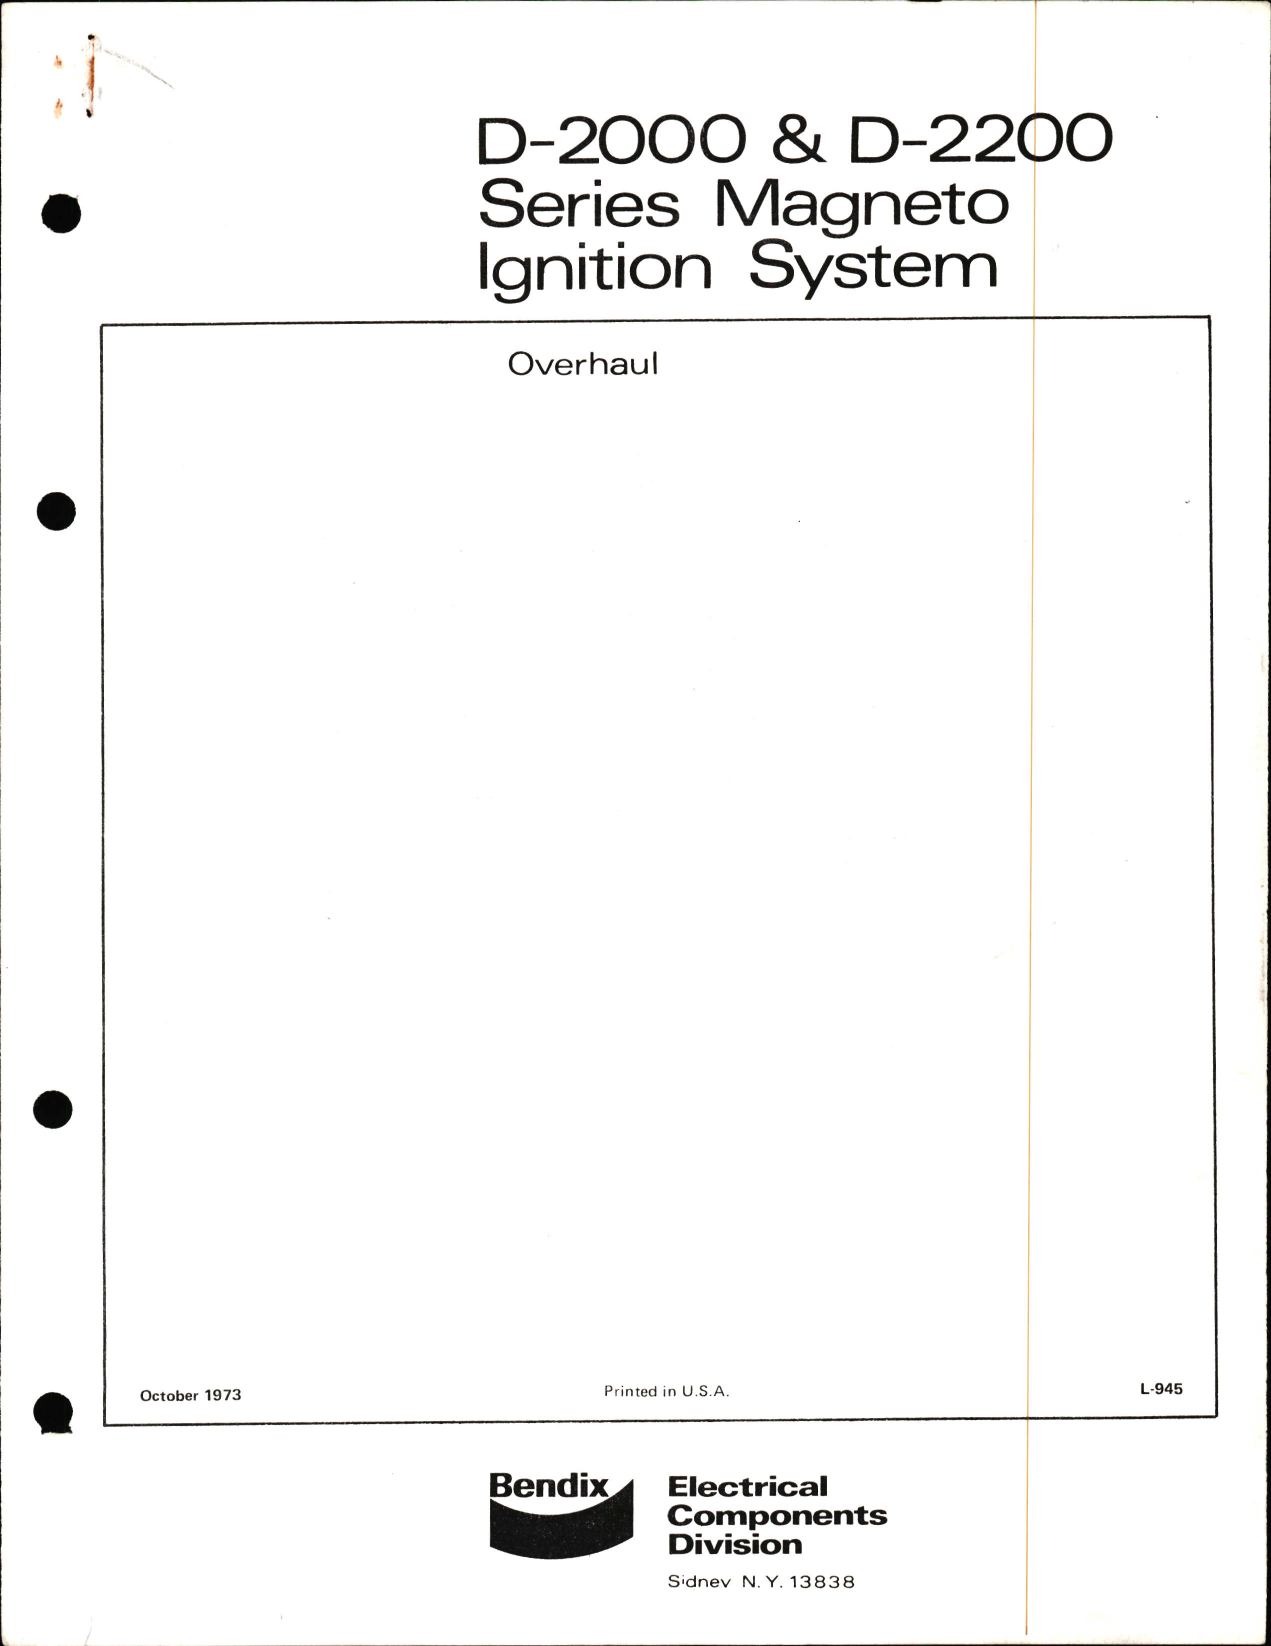 Sample page 1 from AirCorps Library document: Overhaul, D-2000, D-2200, Magneto Ignition System